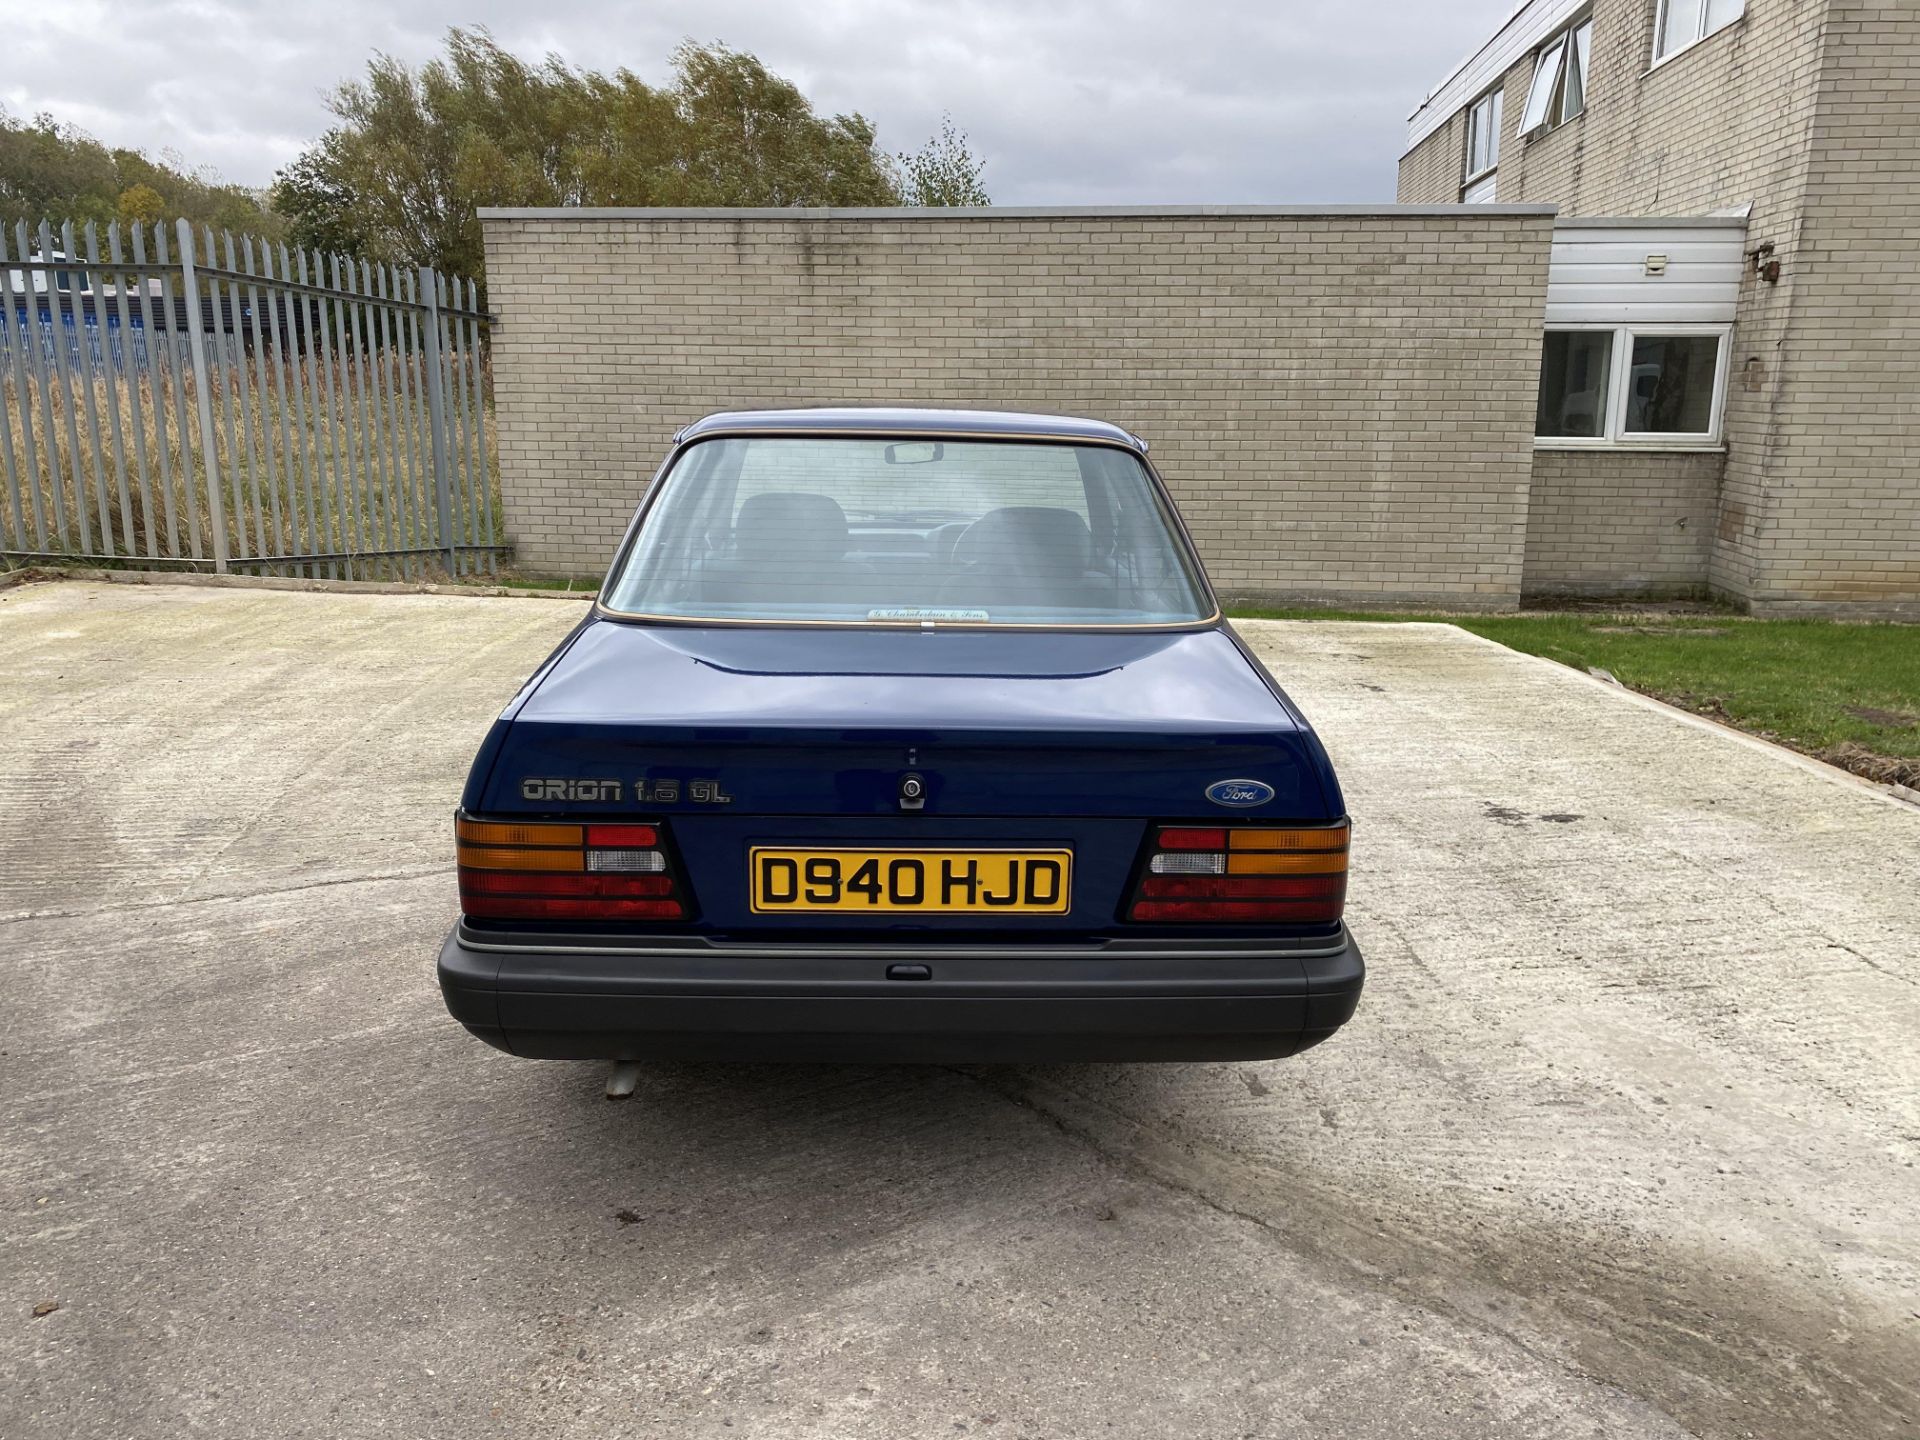 Ford Orion 1.6 GL - Image 5 of 42